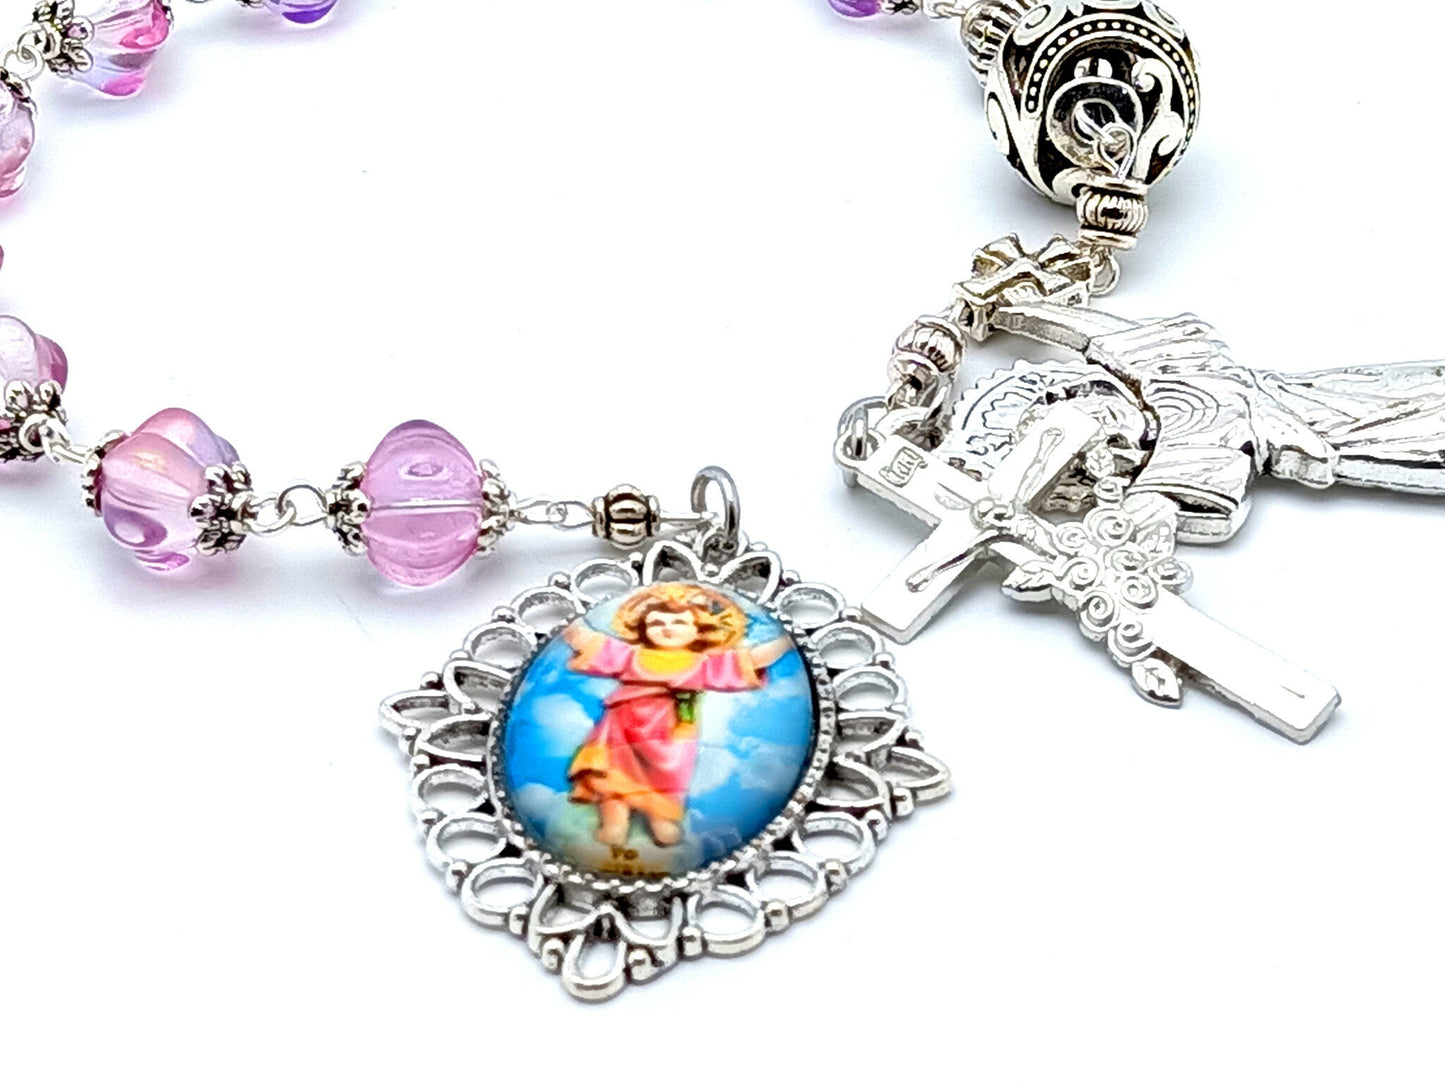 Divino Nino unique rosary beads single decade rosary with pink lamp glass beads, silver Divino Nino medal and crucifix.